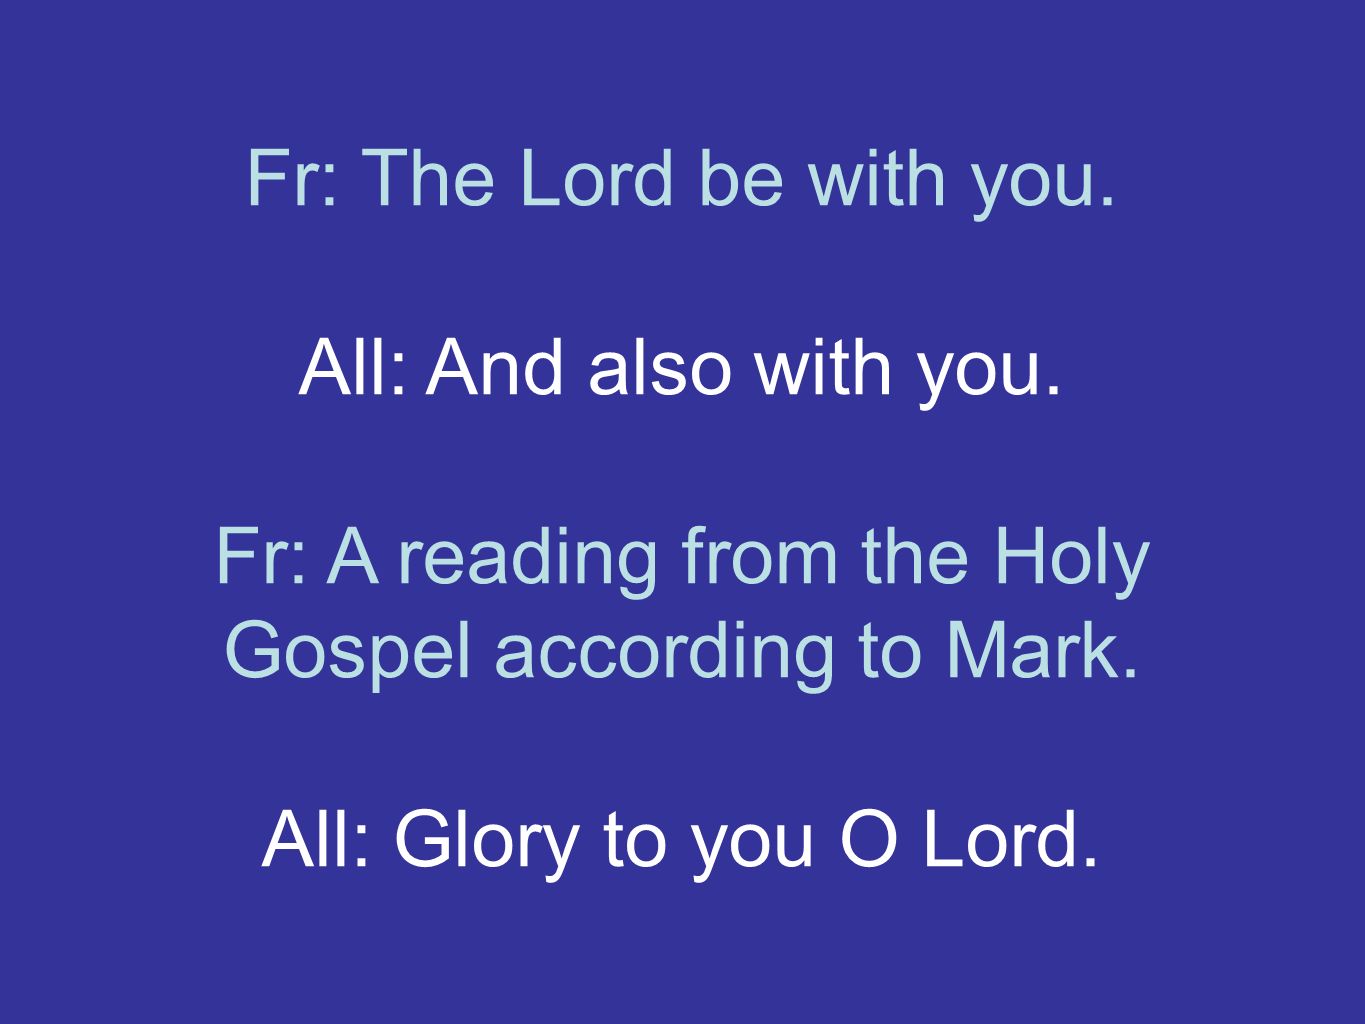 Fr: The Lord be with you. All: And also with you.